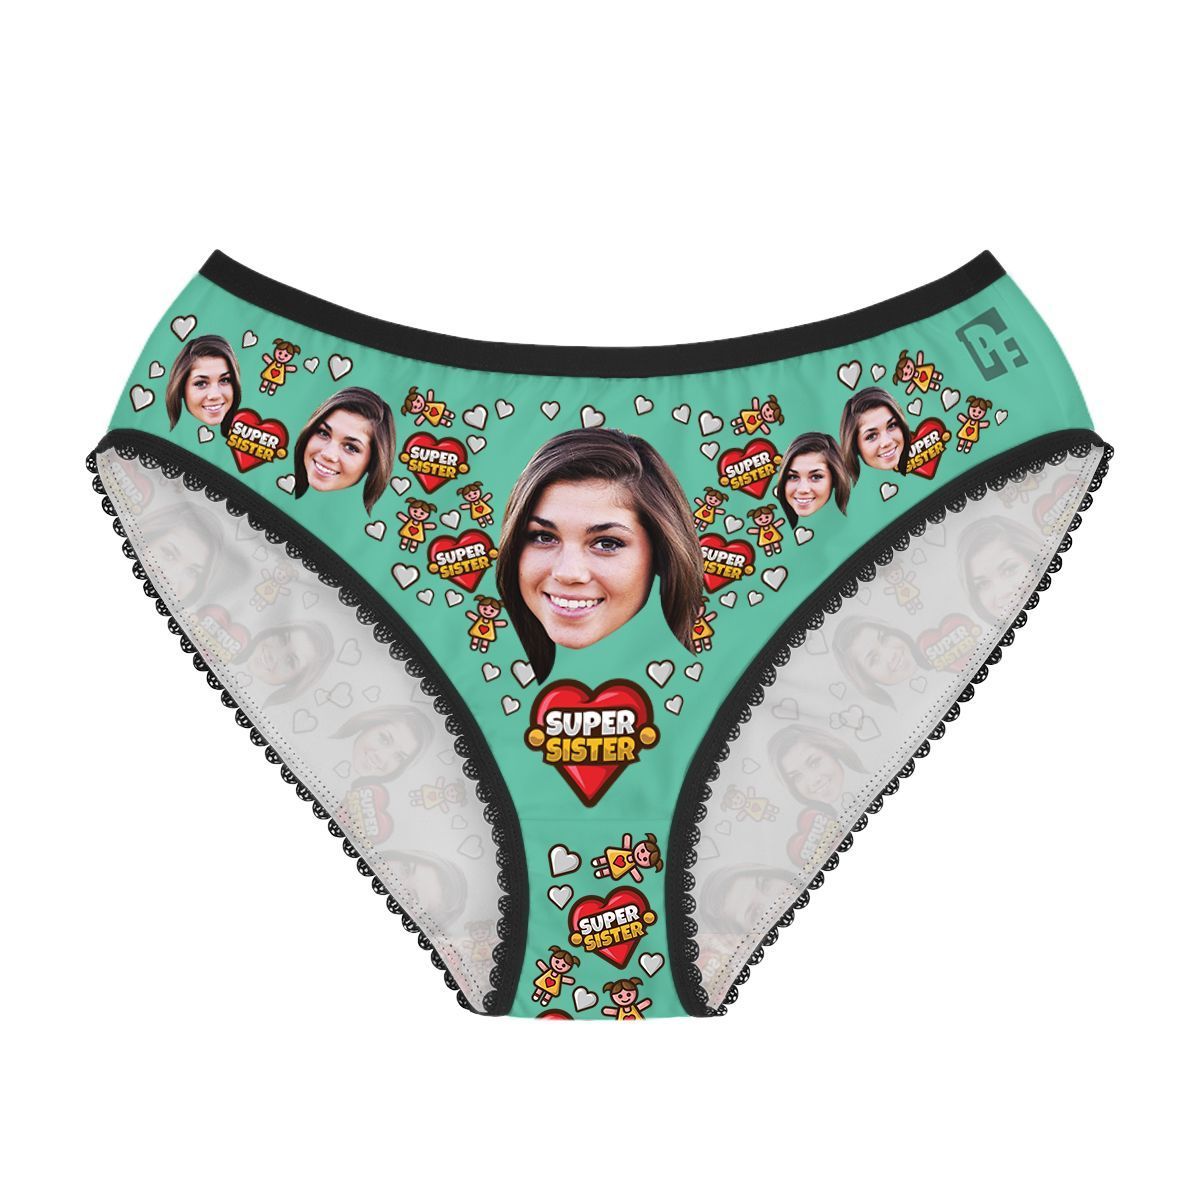 Mint Super Sister women's underwear briefs personalized with photo printed on them